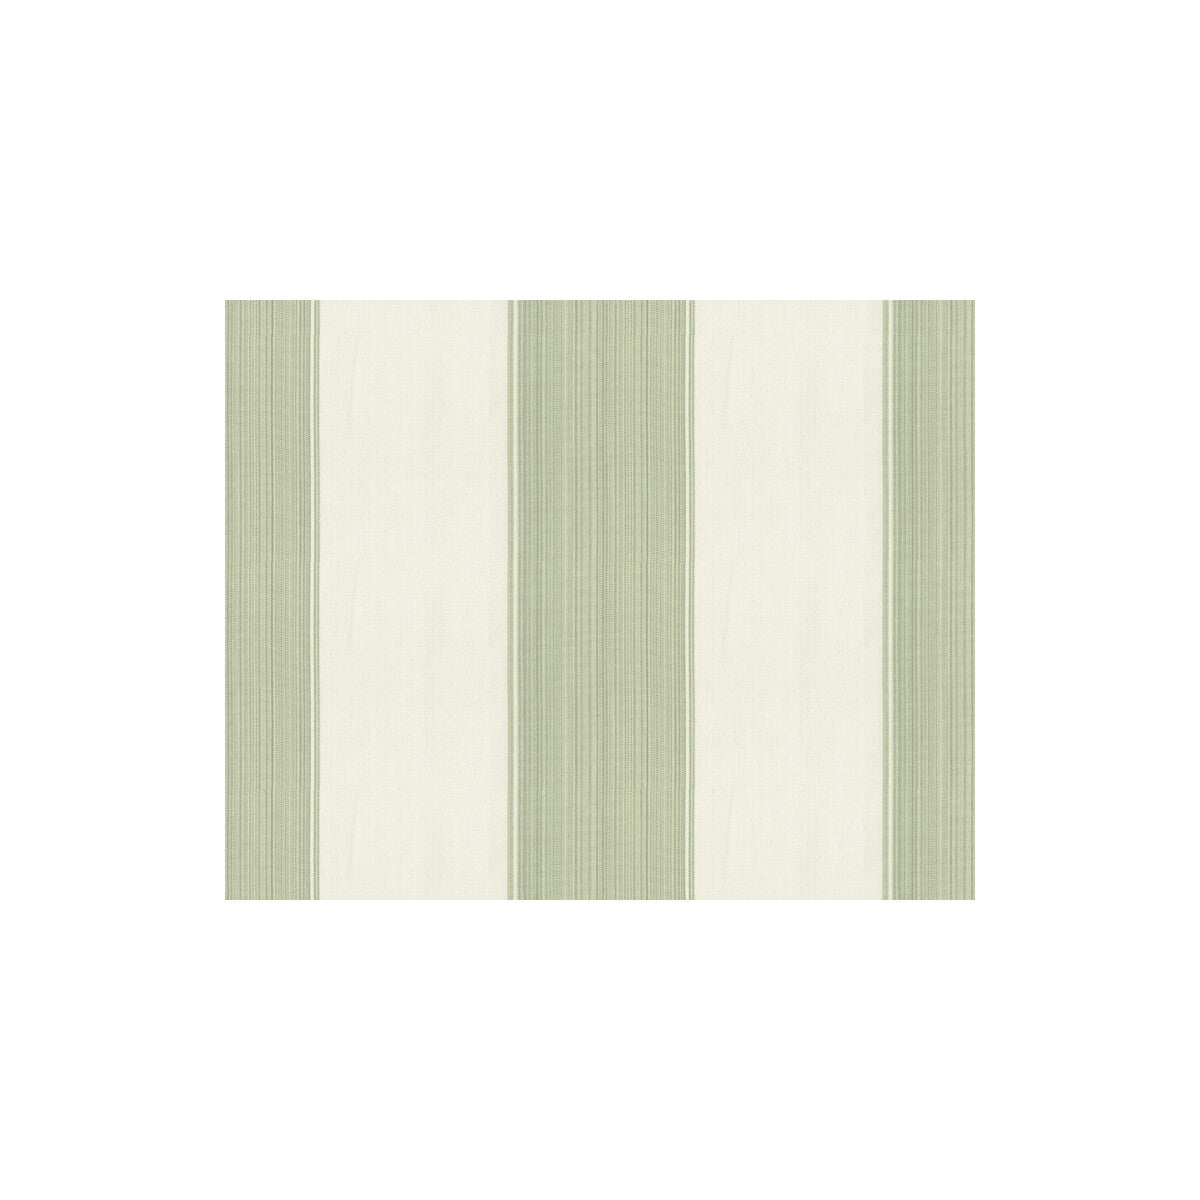 Granby fabric in pear color - pattern 32997.30.0 - by Kravet Basics in the Sarah Richardson Affinity collection